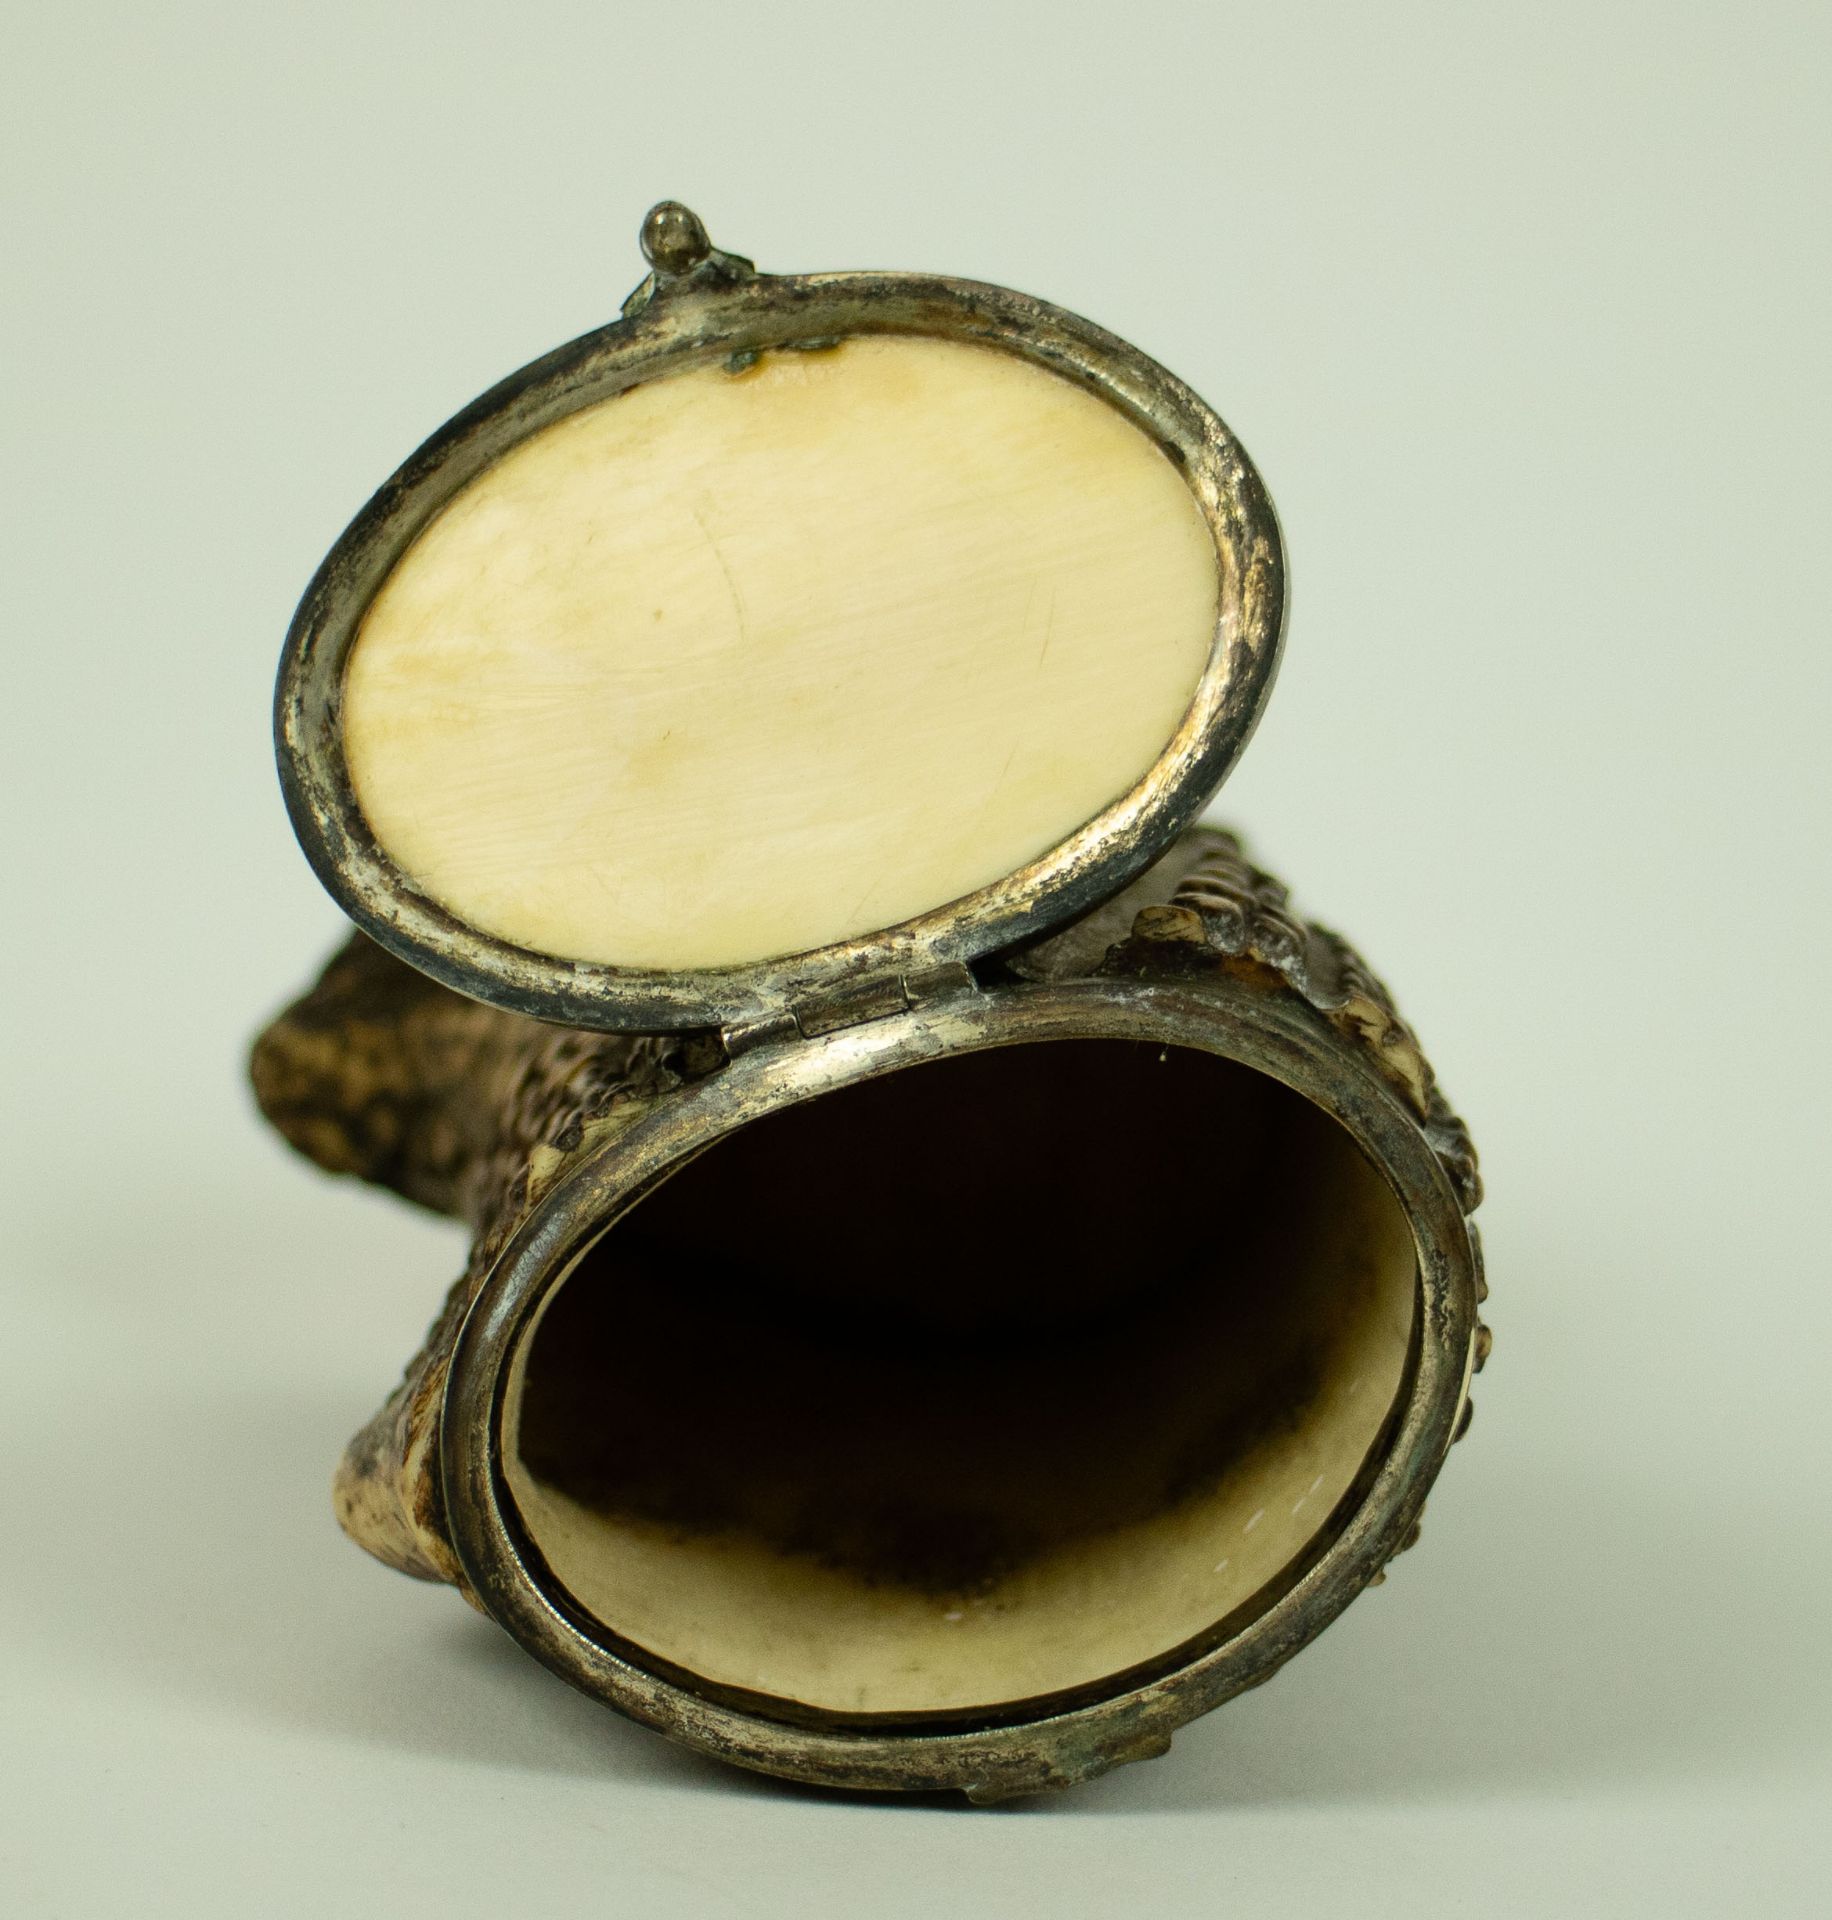 Tobacco box with stag horn and ivory 19th century - Image 4 of 4